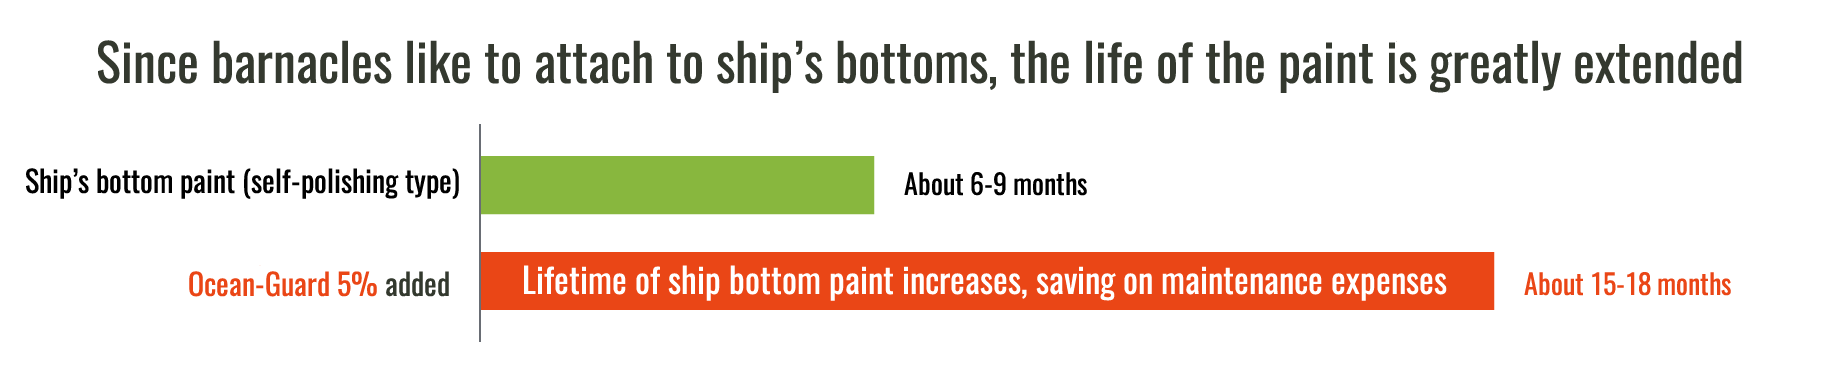 Since barnacles like to attach to ship's bottoms, the life of the paint is greatly extended